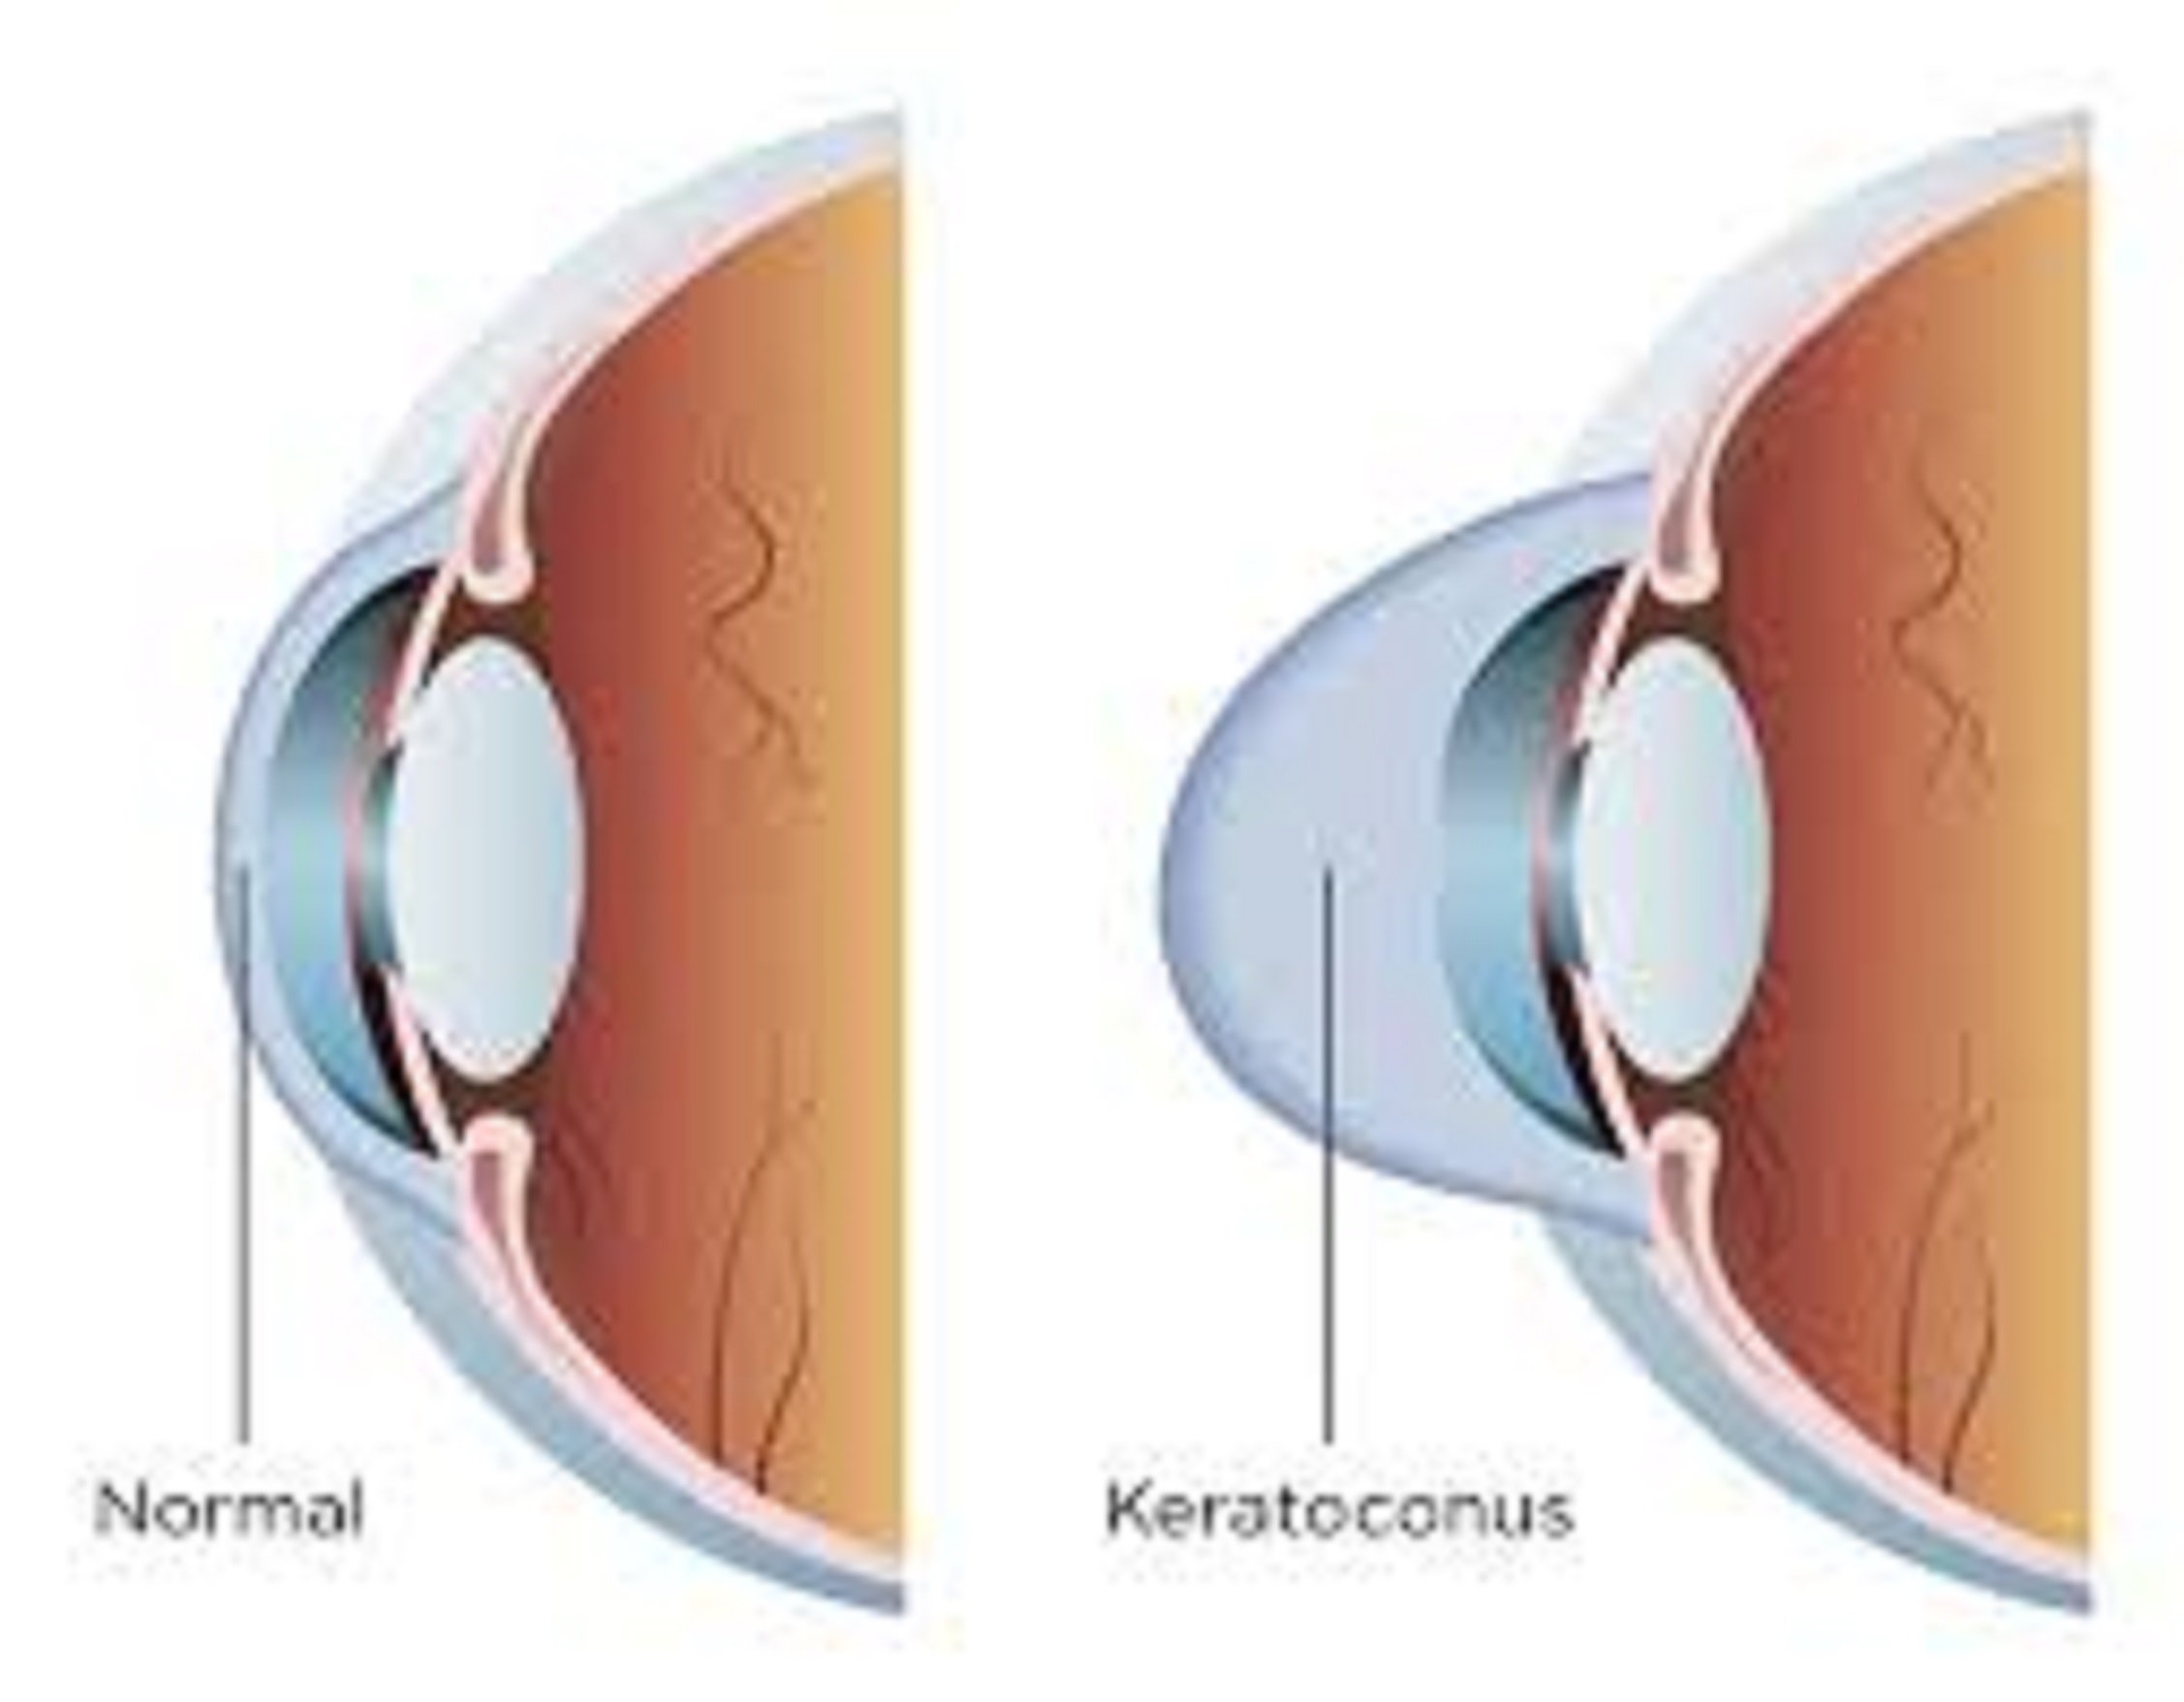 All you need to know about Keratoconus